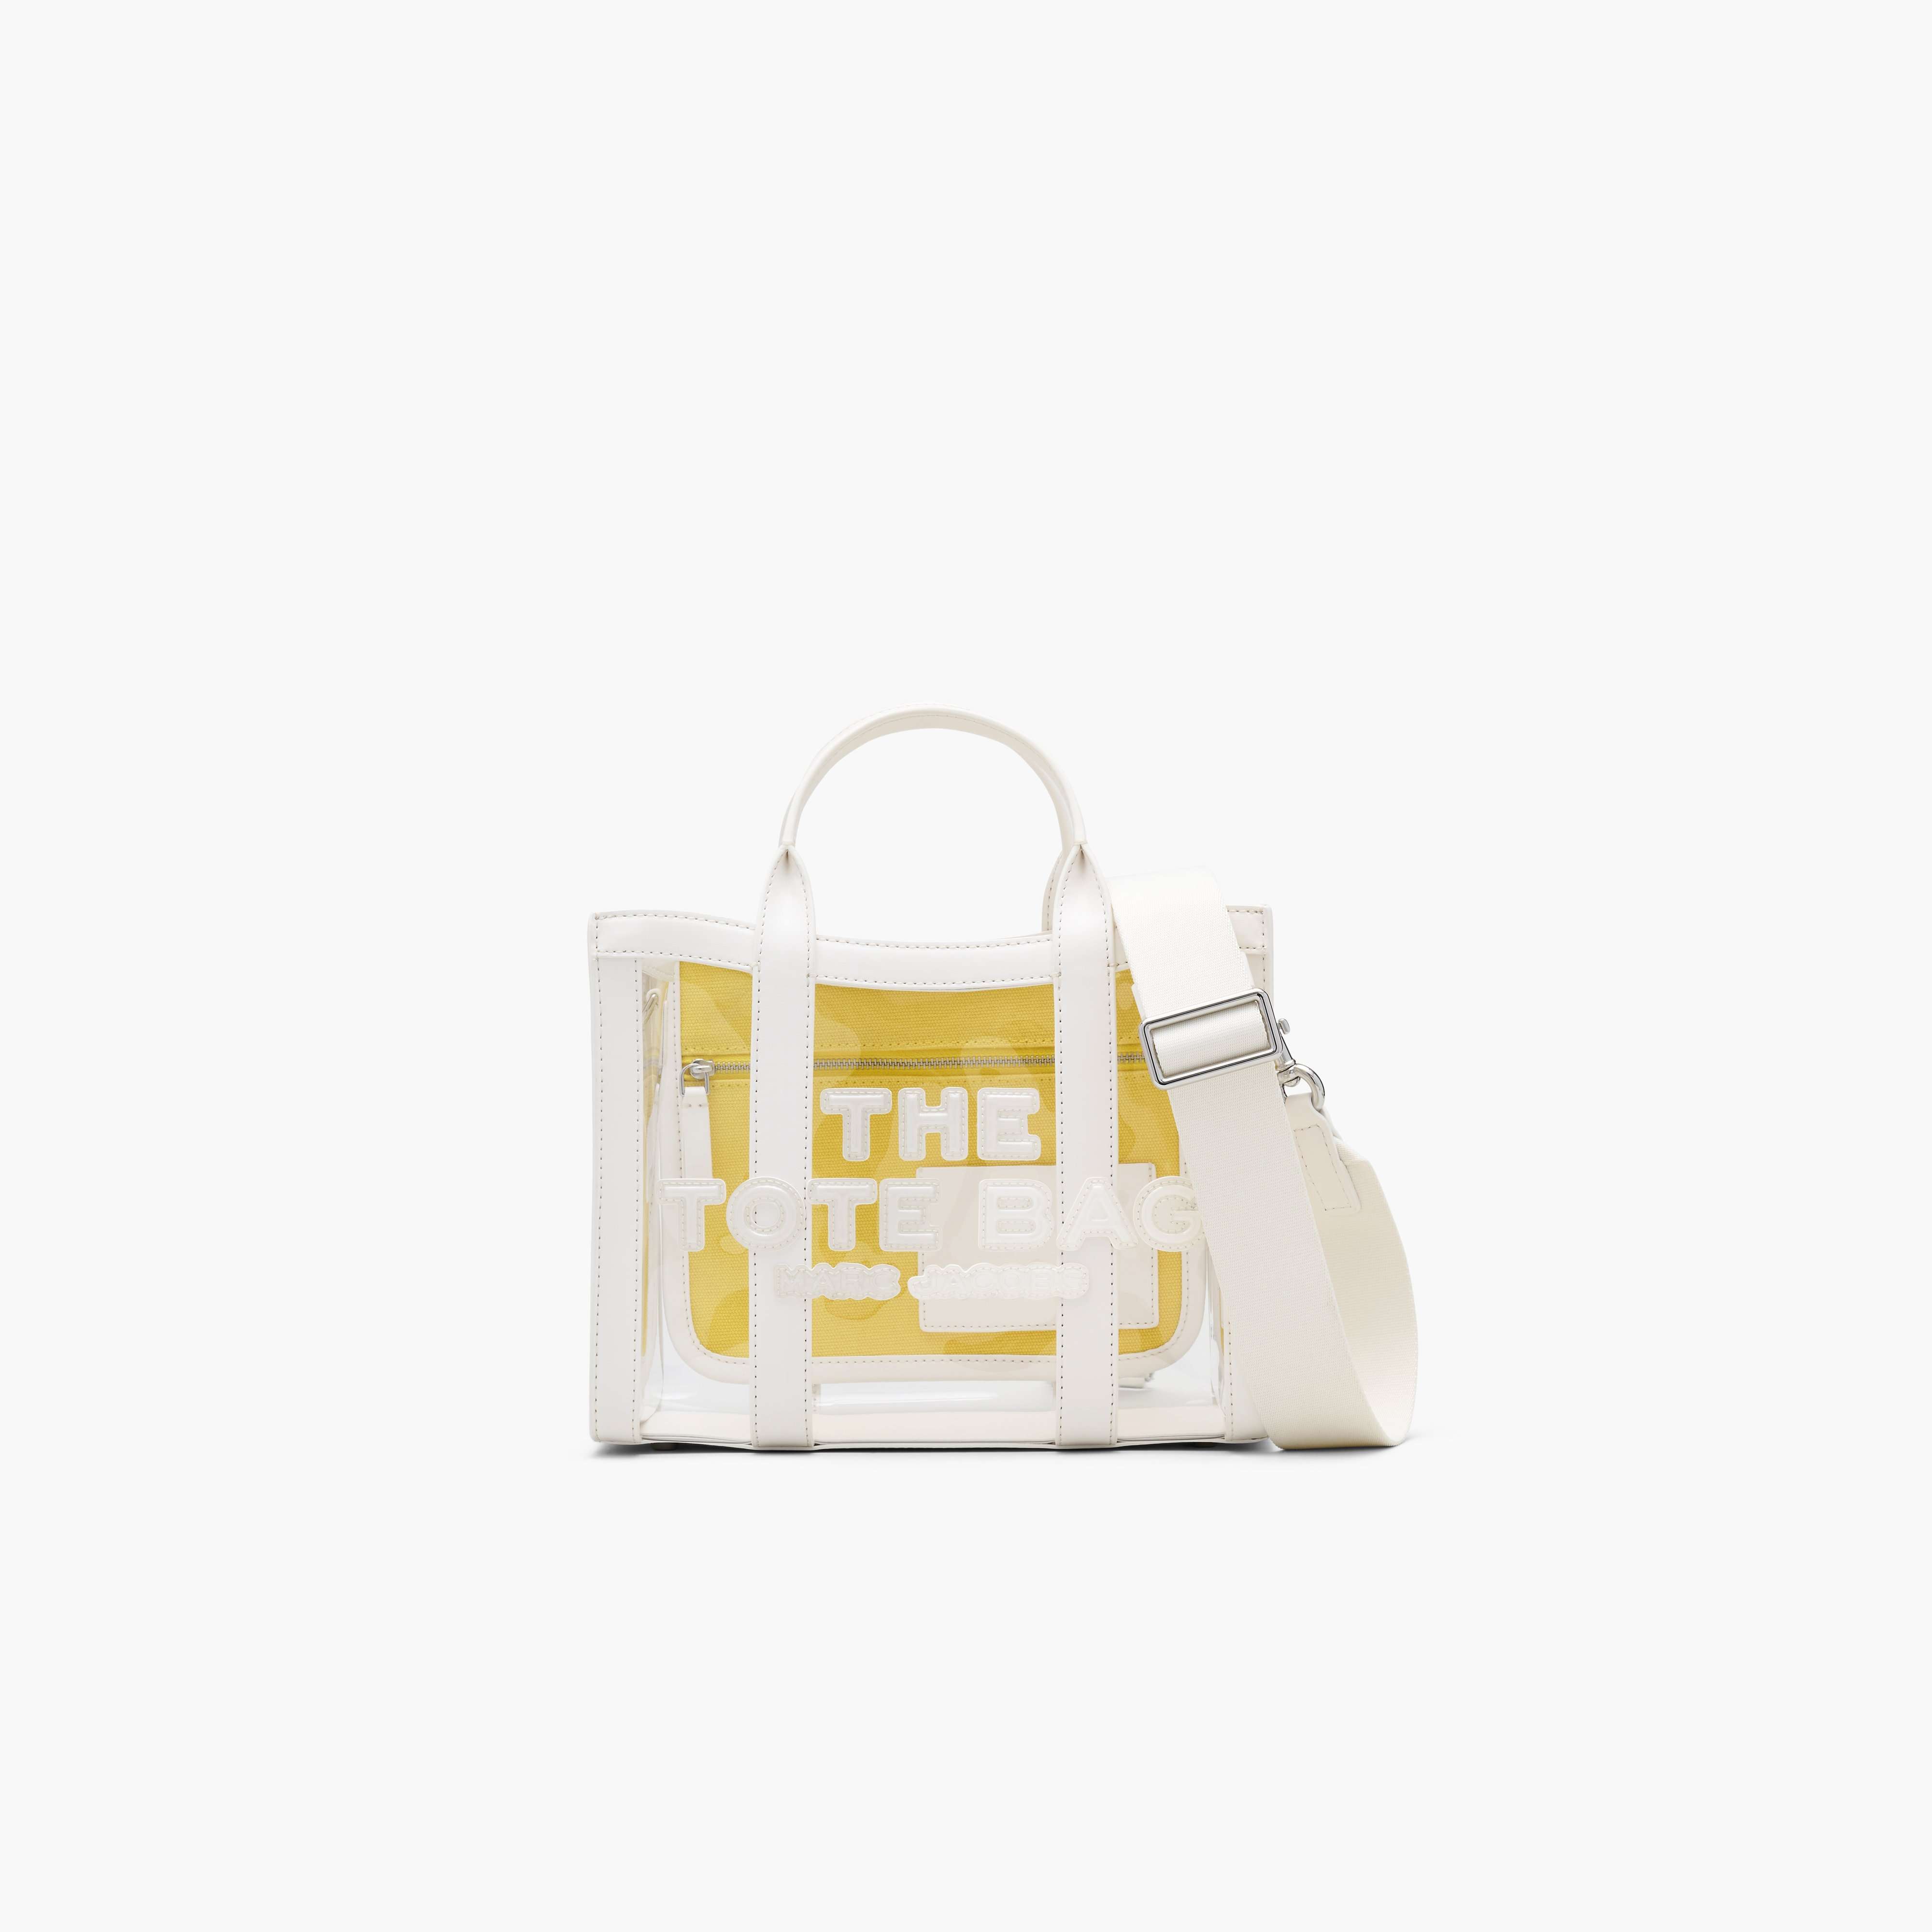 The Clear Small Tote Bag